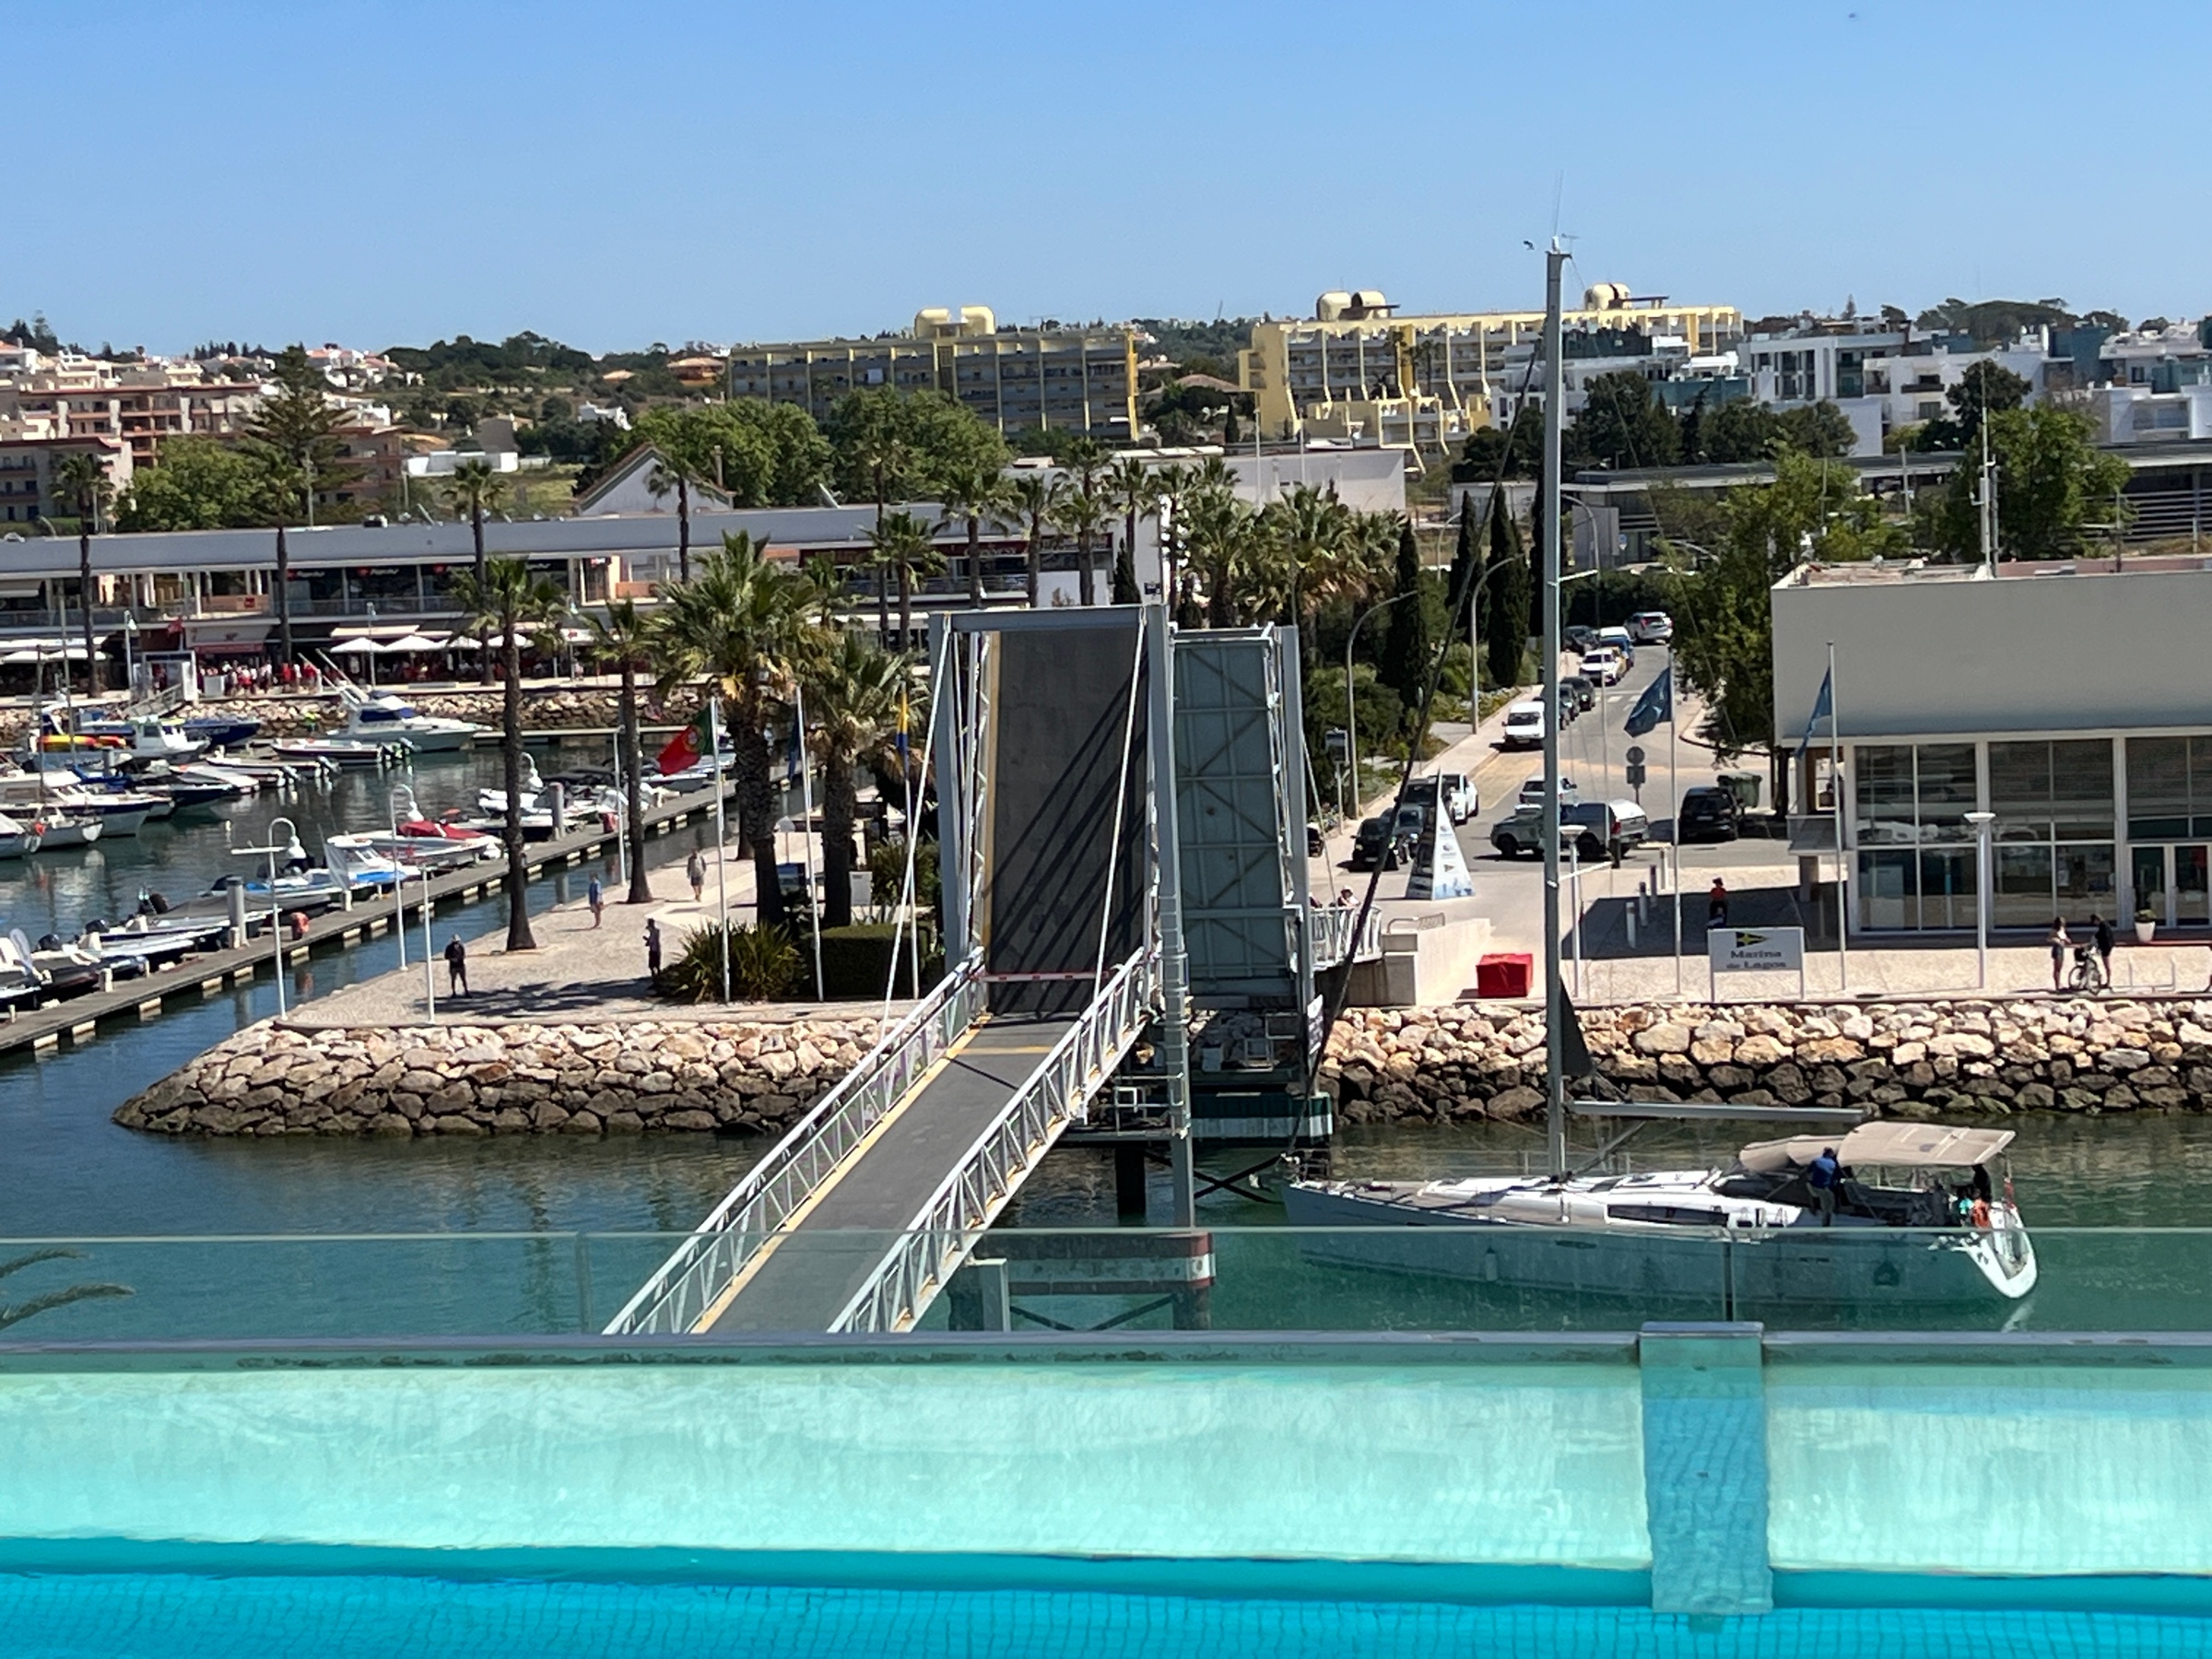 a pedestrian drawbridge at the mouth of the marina that has been raised to allow a masted yacht to pass